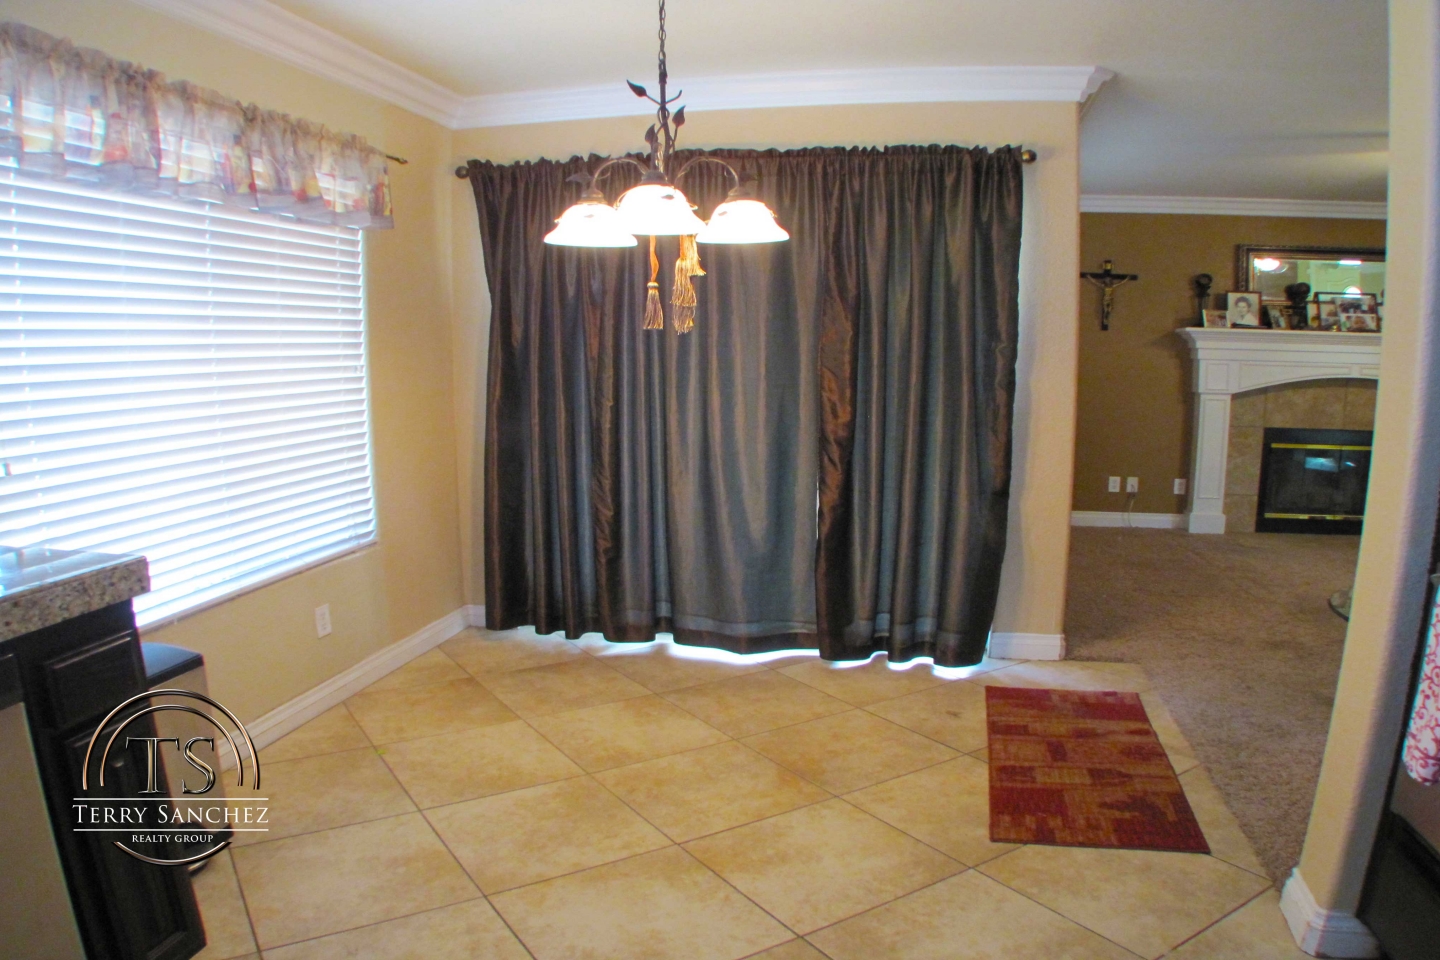 HOME FOR SALE IN MORENO VALLEY CA 92557 BY REAL ESTATE BROKER TERRY SANCHEZ $310,000 WITH 4 BEDROOMS 3 BATHROOMS